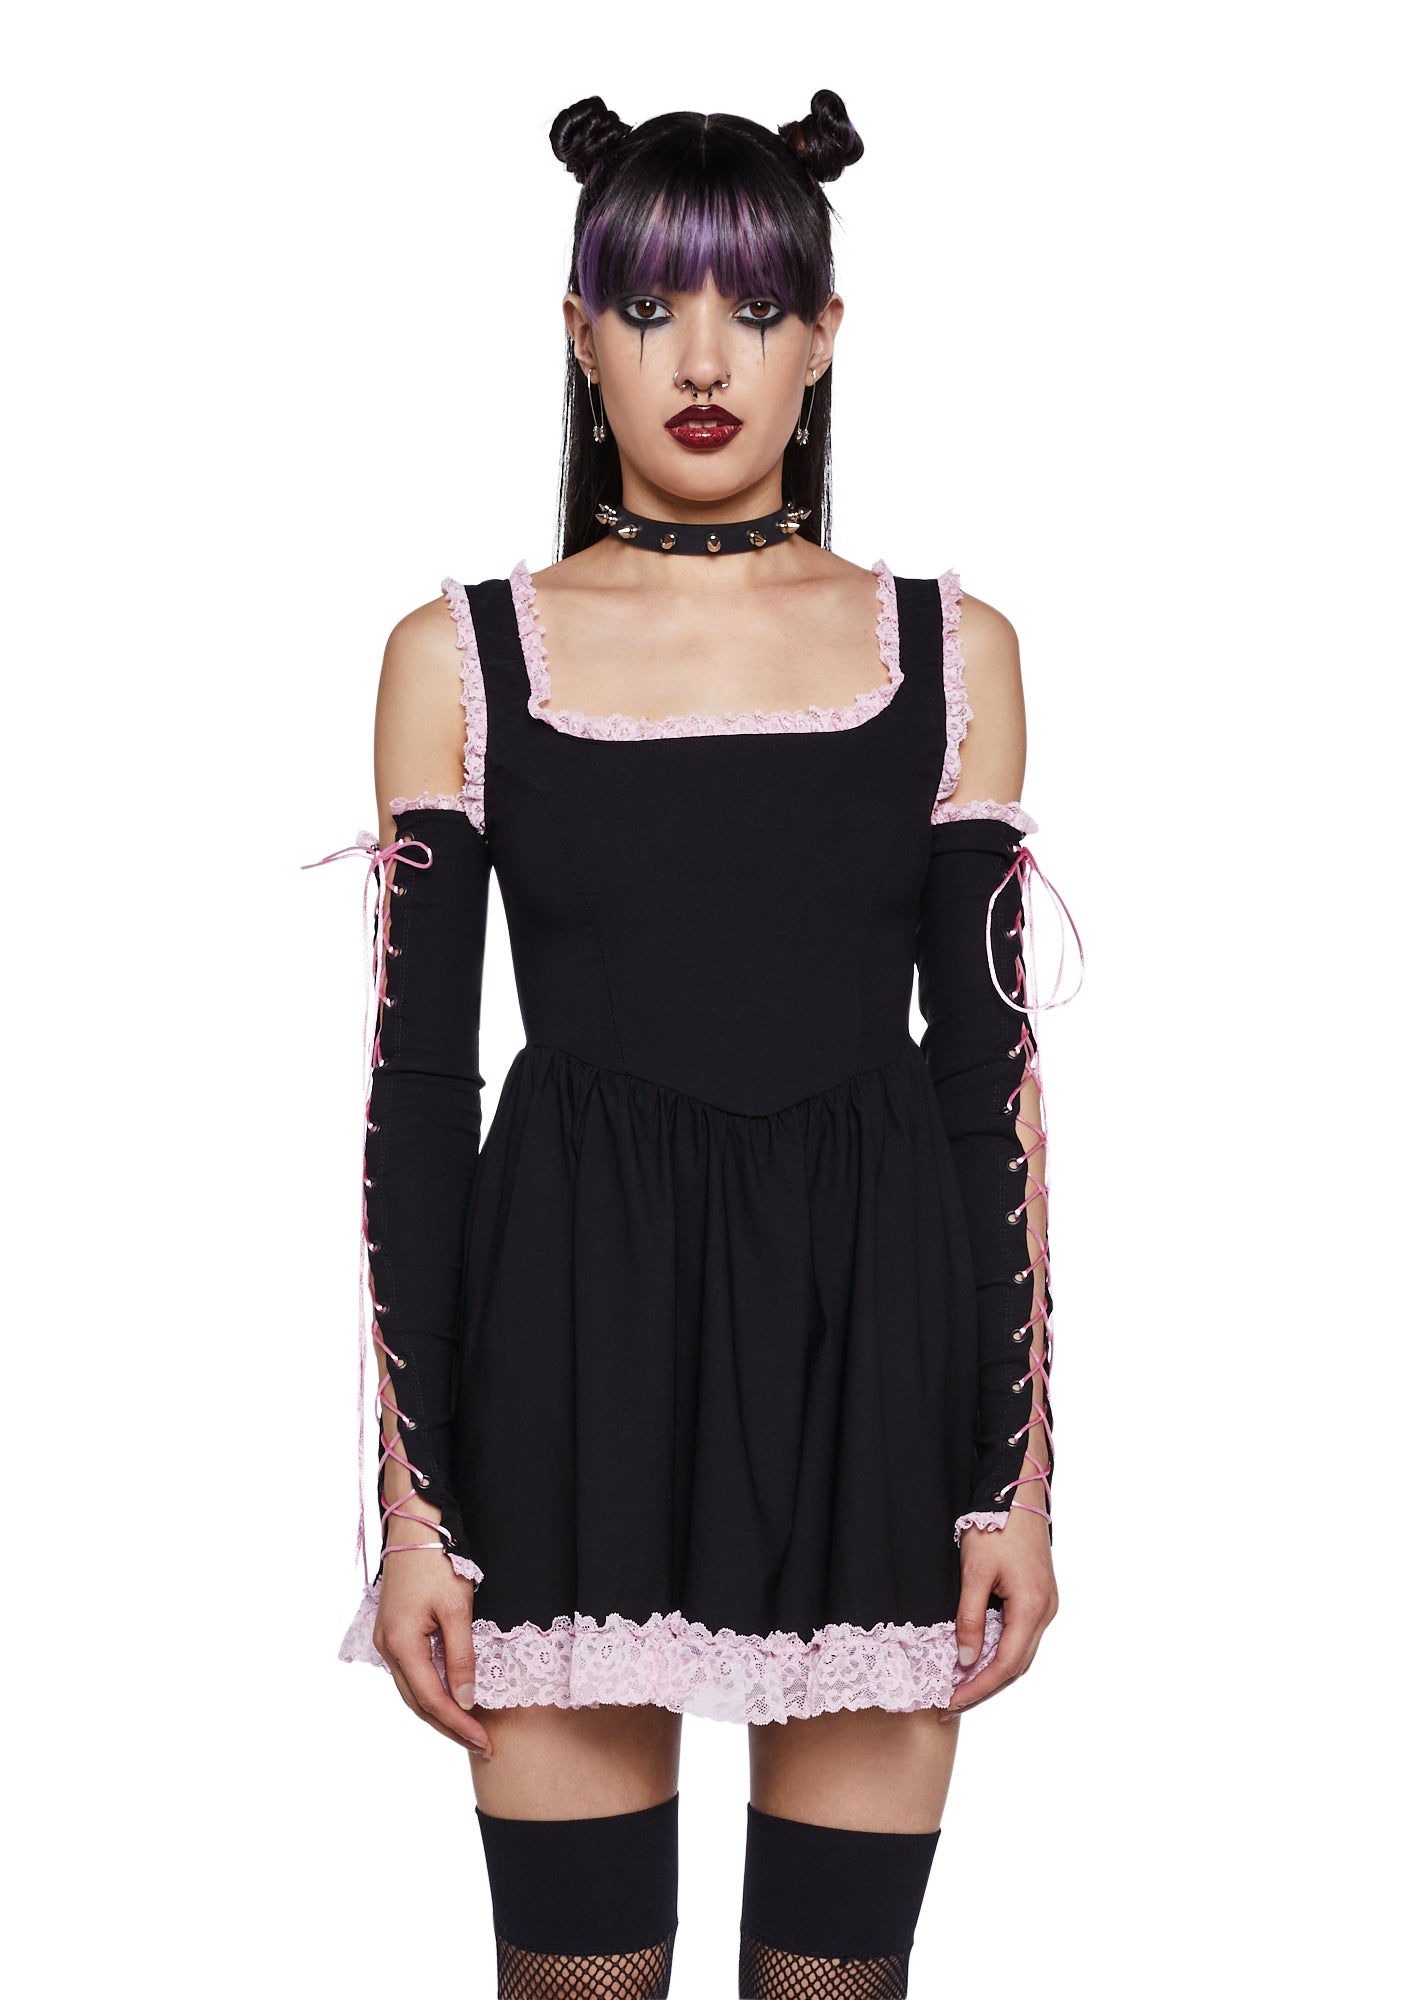 The Grave Girls Lace Trim Dress With Lace Up Gloves - Black/Pink